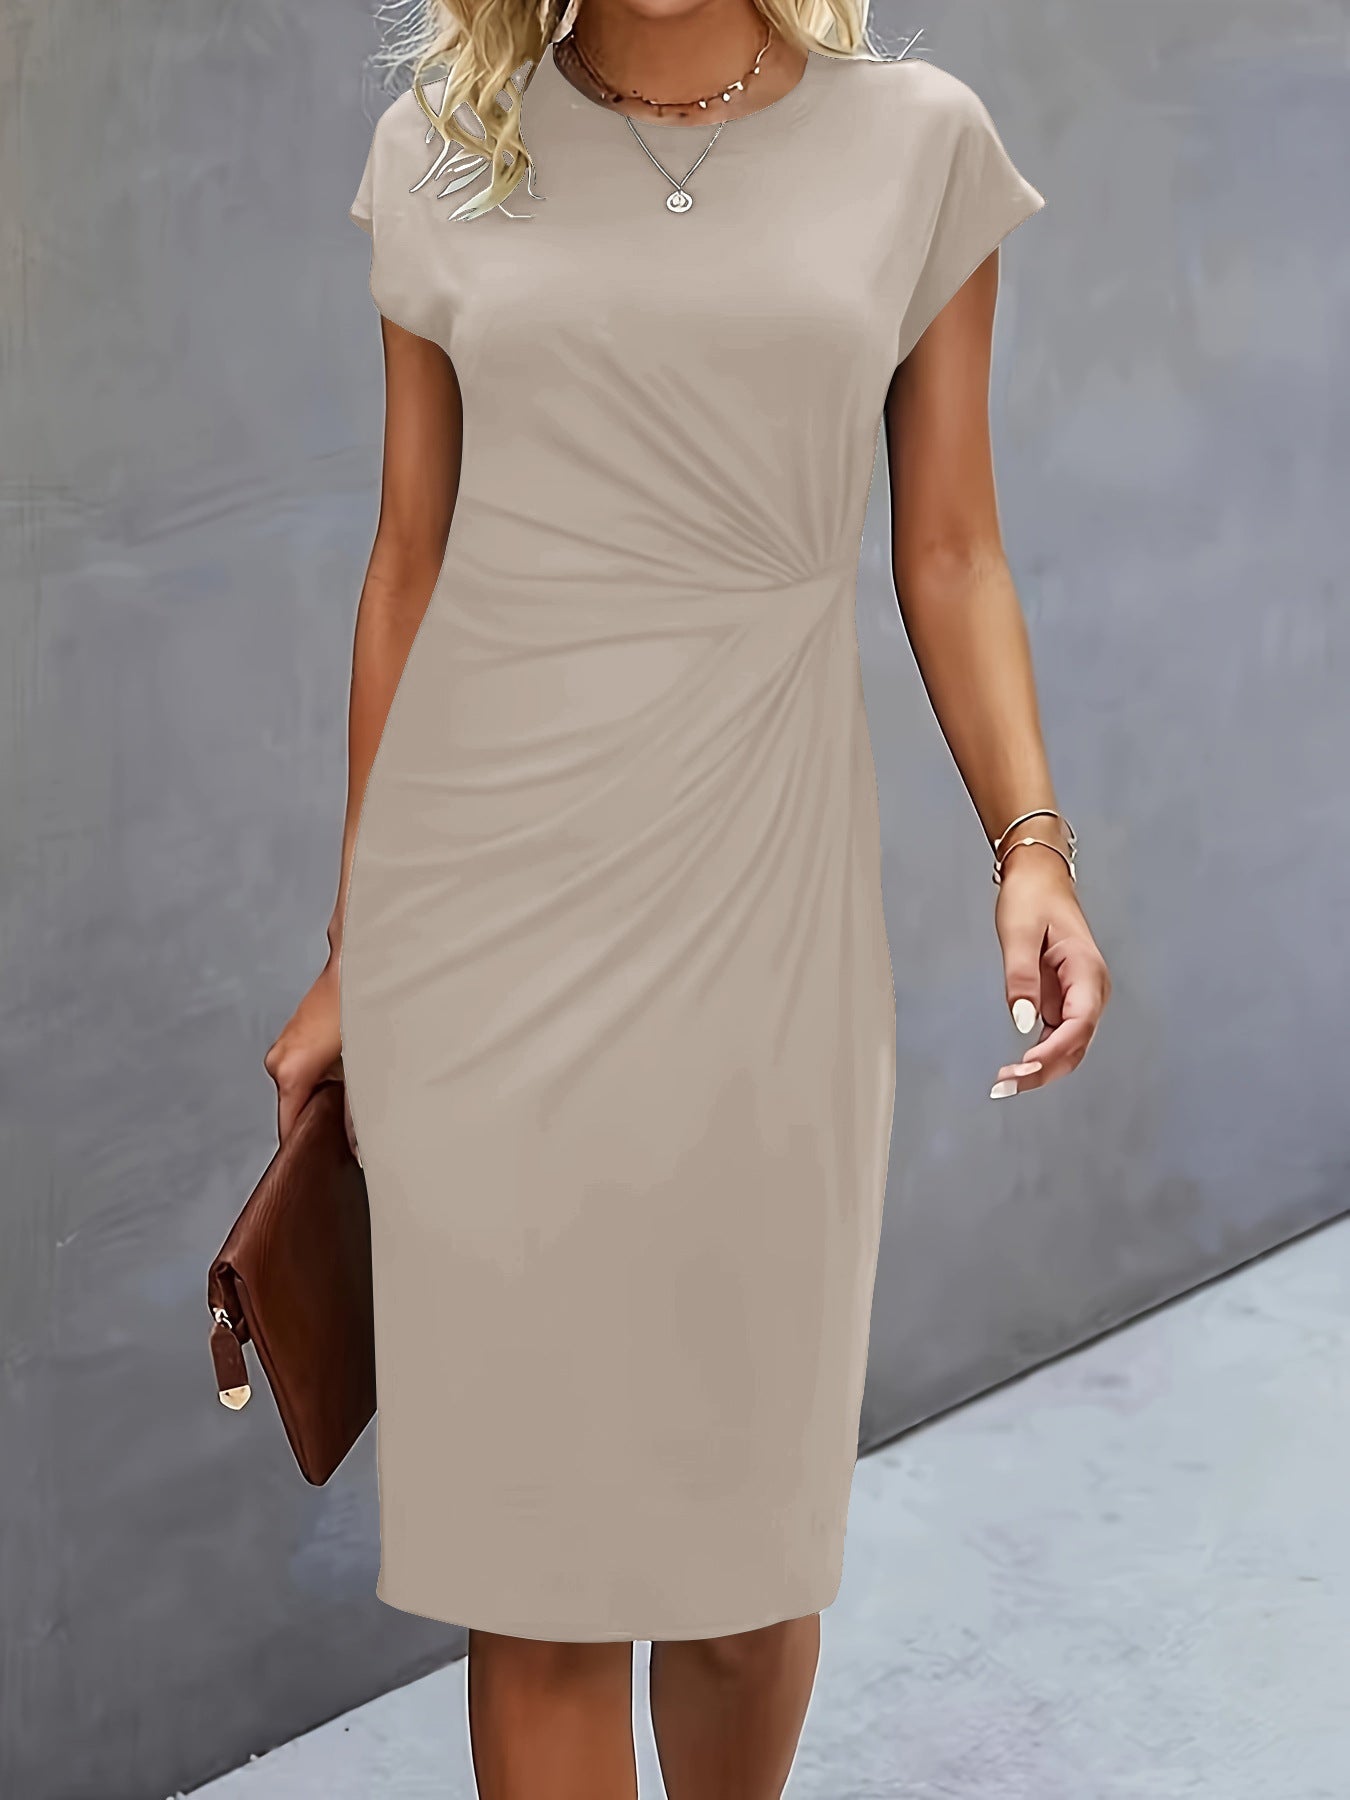 Women's Casual Tight Front Knot Round Neck Mid-length Dress